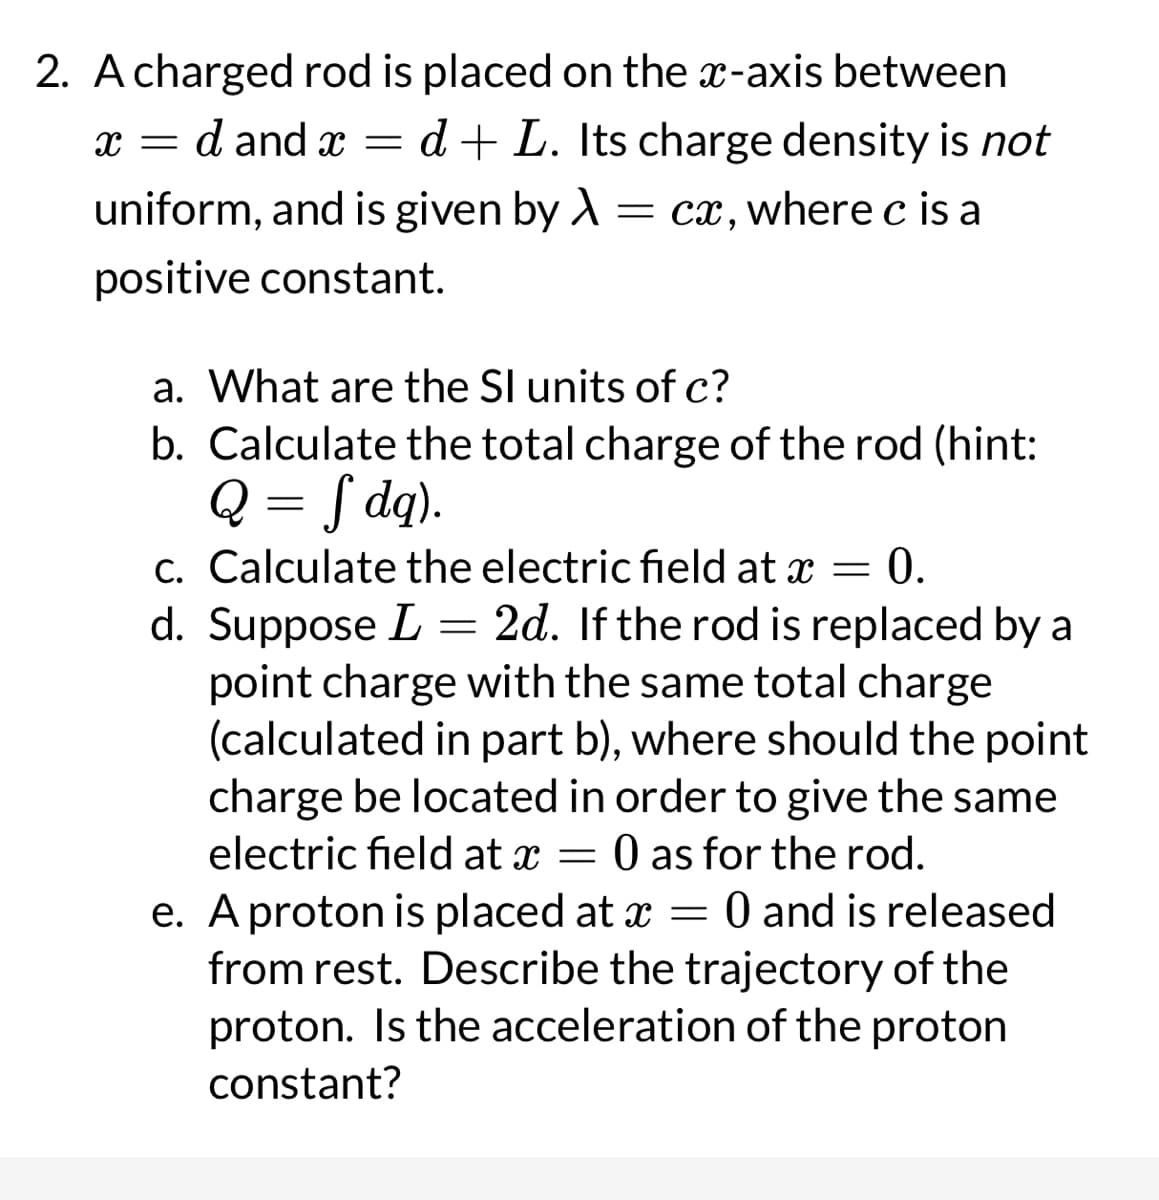 2. A charged rod is placed on the x-axis between
x = d and x = d+ L. Its charge density is not
uniform, and is given by A = cx, where c is a
positive constant.
a. What are the SI units of c?
b. Calculate the total charge of the rod (hint:
Q = f dq).
c. Calculate the electric field at x = 0.
d. Suppose L = 2d. If the rod is replaced by a
point charge with the same total charge
(calculated in part b), where should the point
charge be located in order to give the same
electric field at x = 0 as for the rod.
e. A proton is placed at x = 0 and is released
from rest. Describe the trajectory of the
proton. Is the acceleration of the proton
constant?